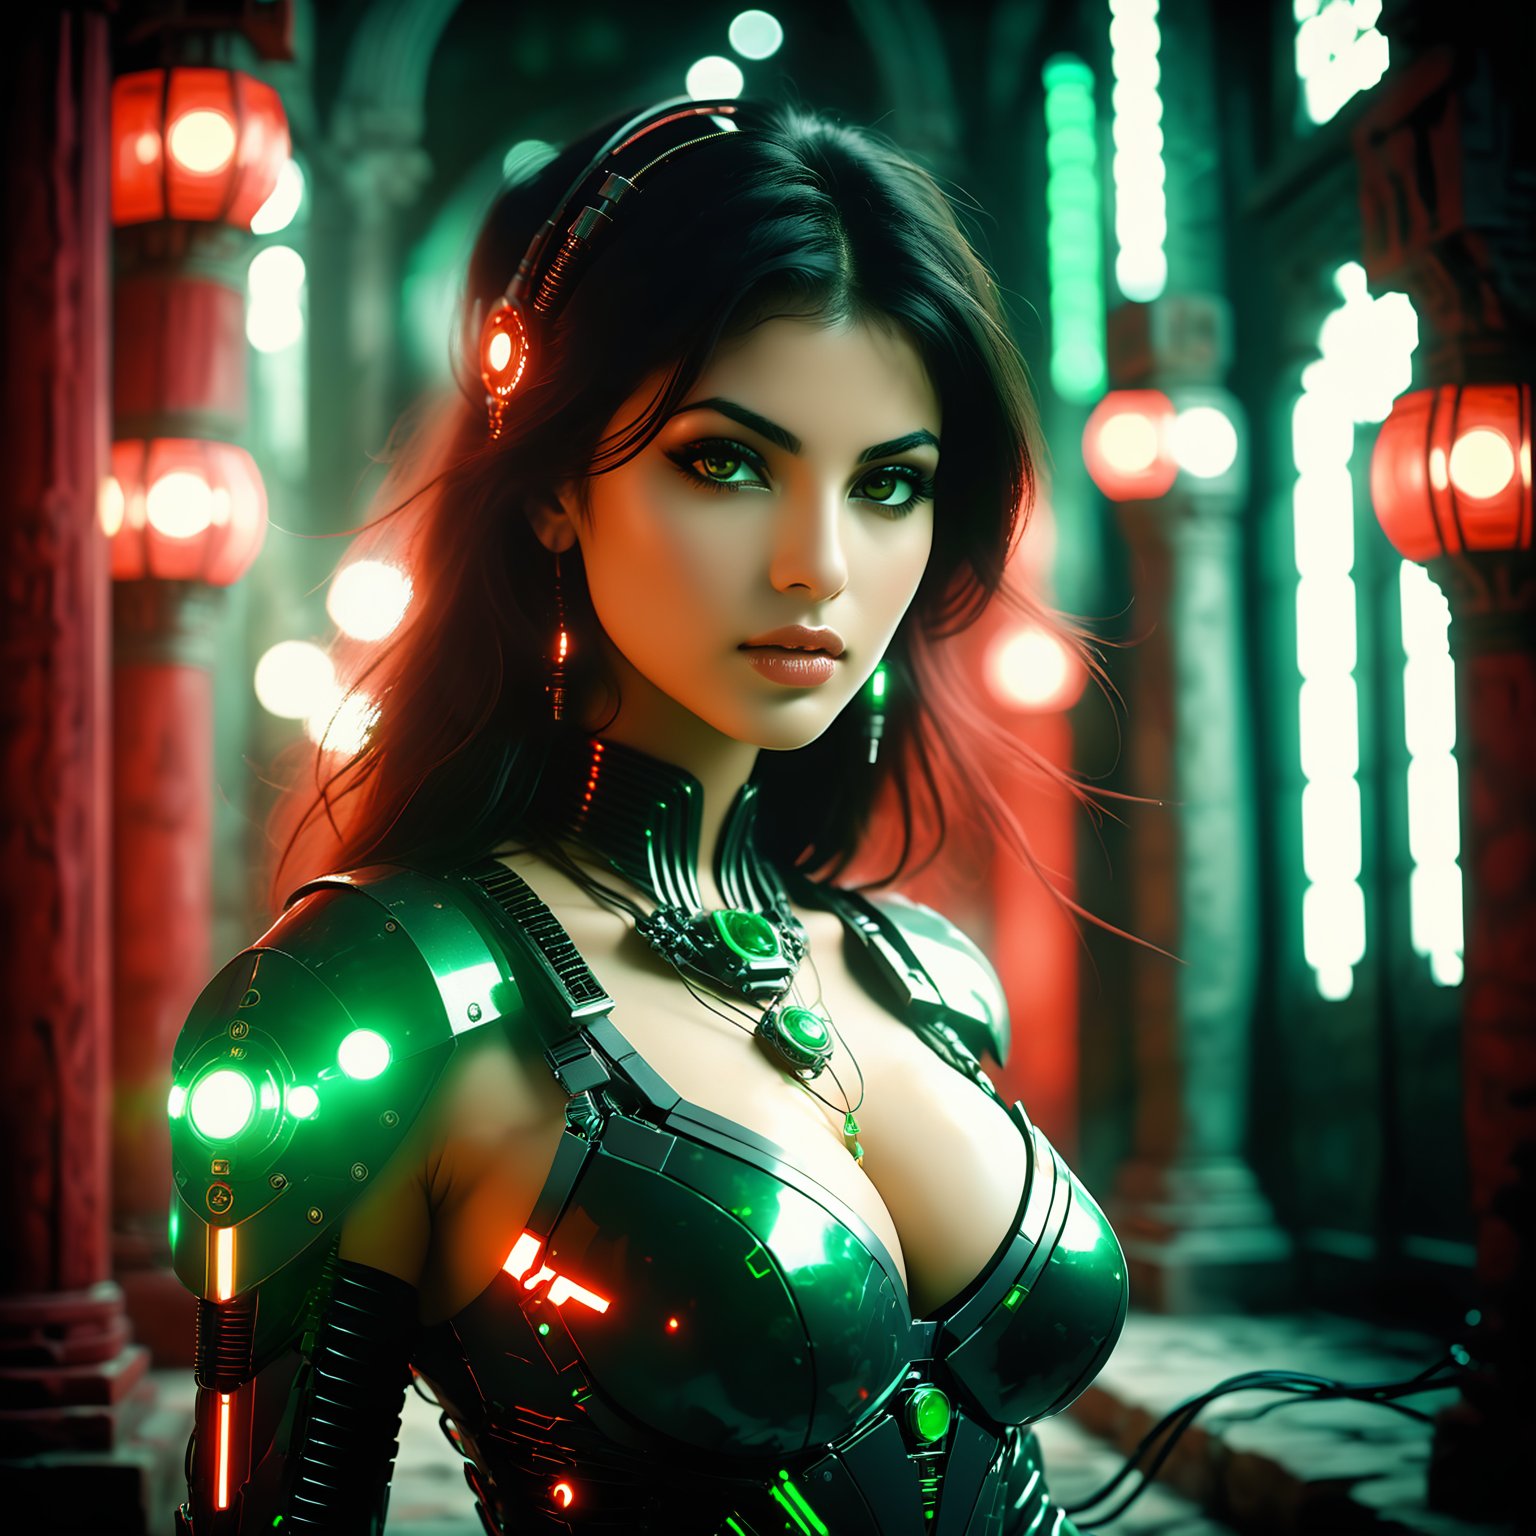 analog film photo nodf_xl, high quality, Persian female, sexy, cleavage, cyborg scifi, dark, glowing, red and green, mechanical, wires and cables, portrait, fierce, dynamic pose, bokeh, Ancient temple background, <lora:nodf_xl:1> . faded film, desaturated, 35mm photo, grainy, vignette, vintage, Kodachrome, Lomography, stained, highly detailed, found footage